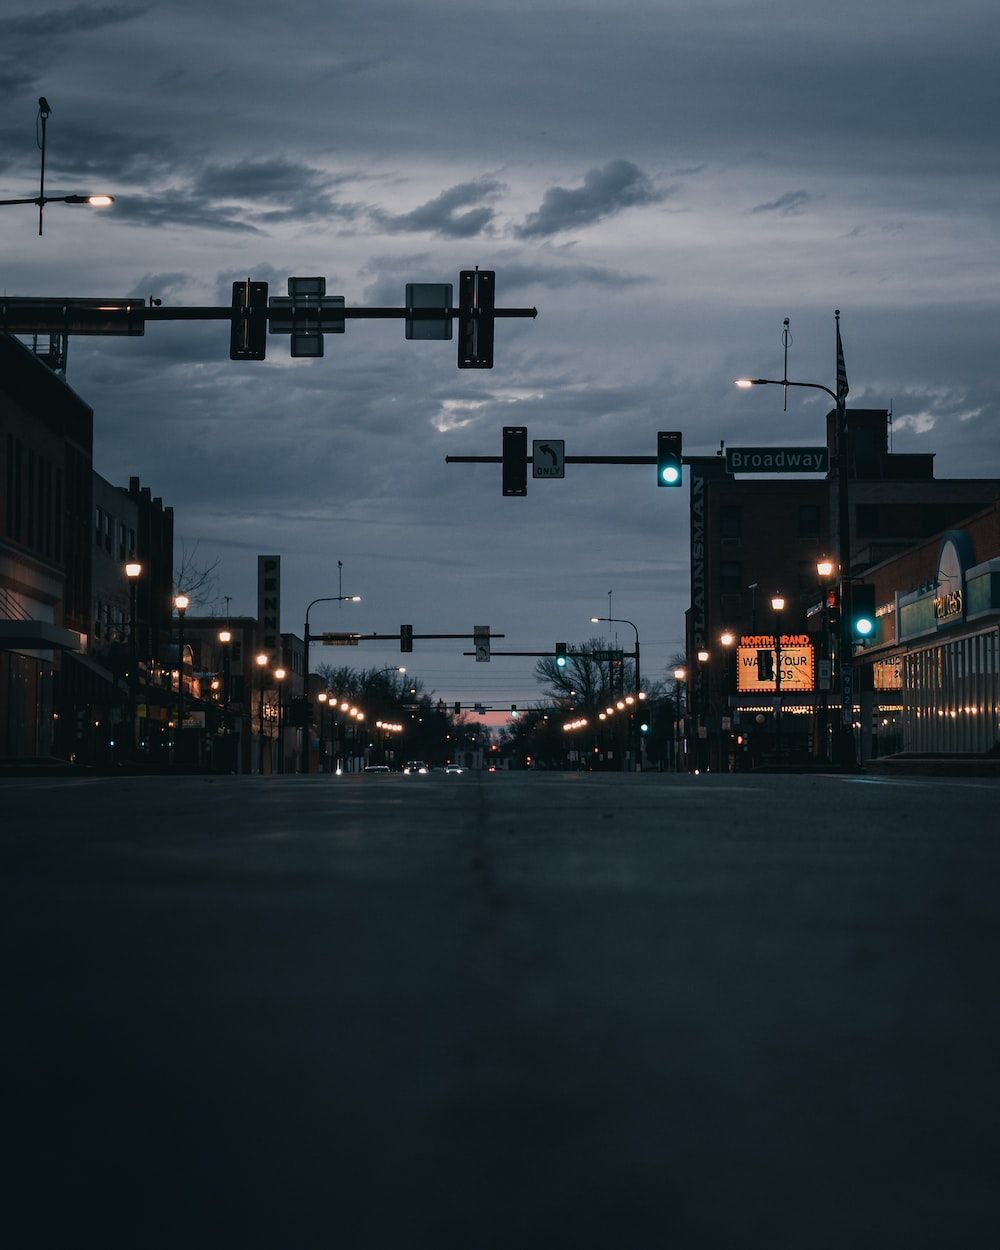 A dark street with traffic lights and street lights on a cloudy evening - Broadway